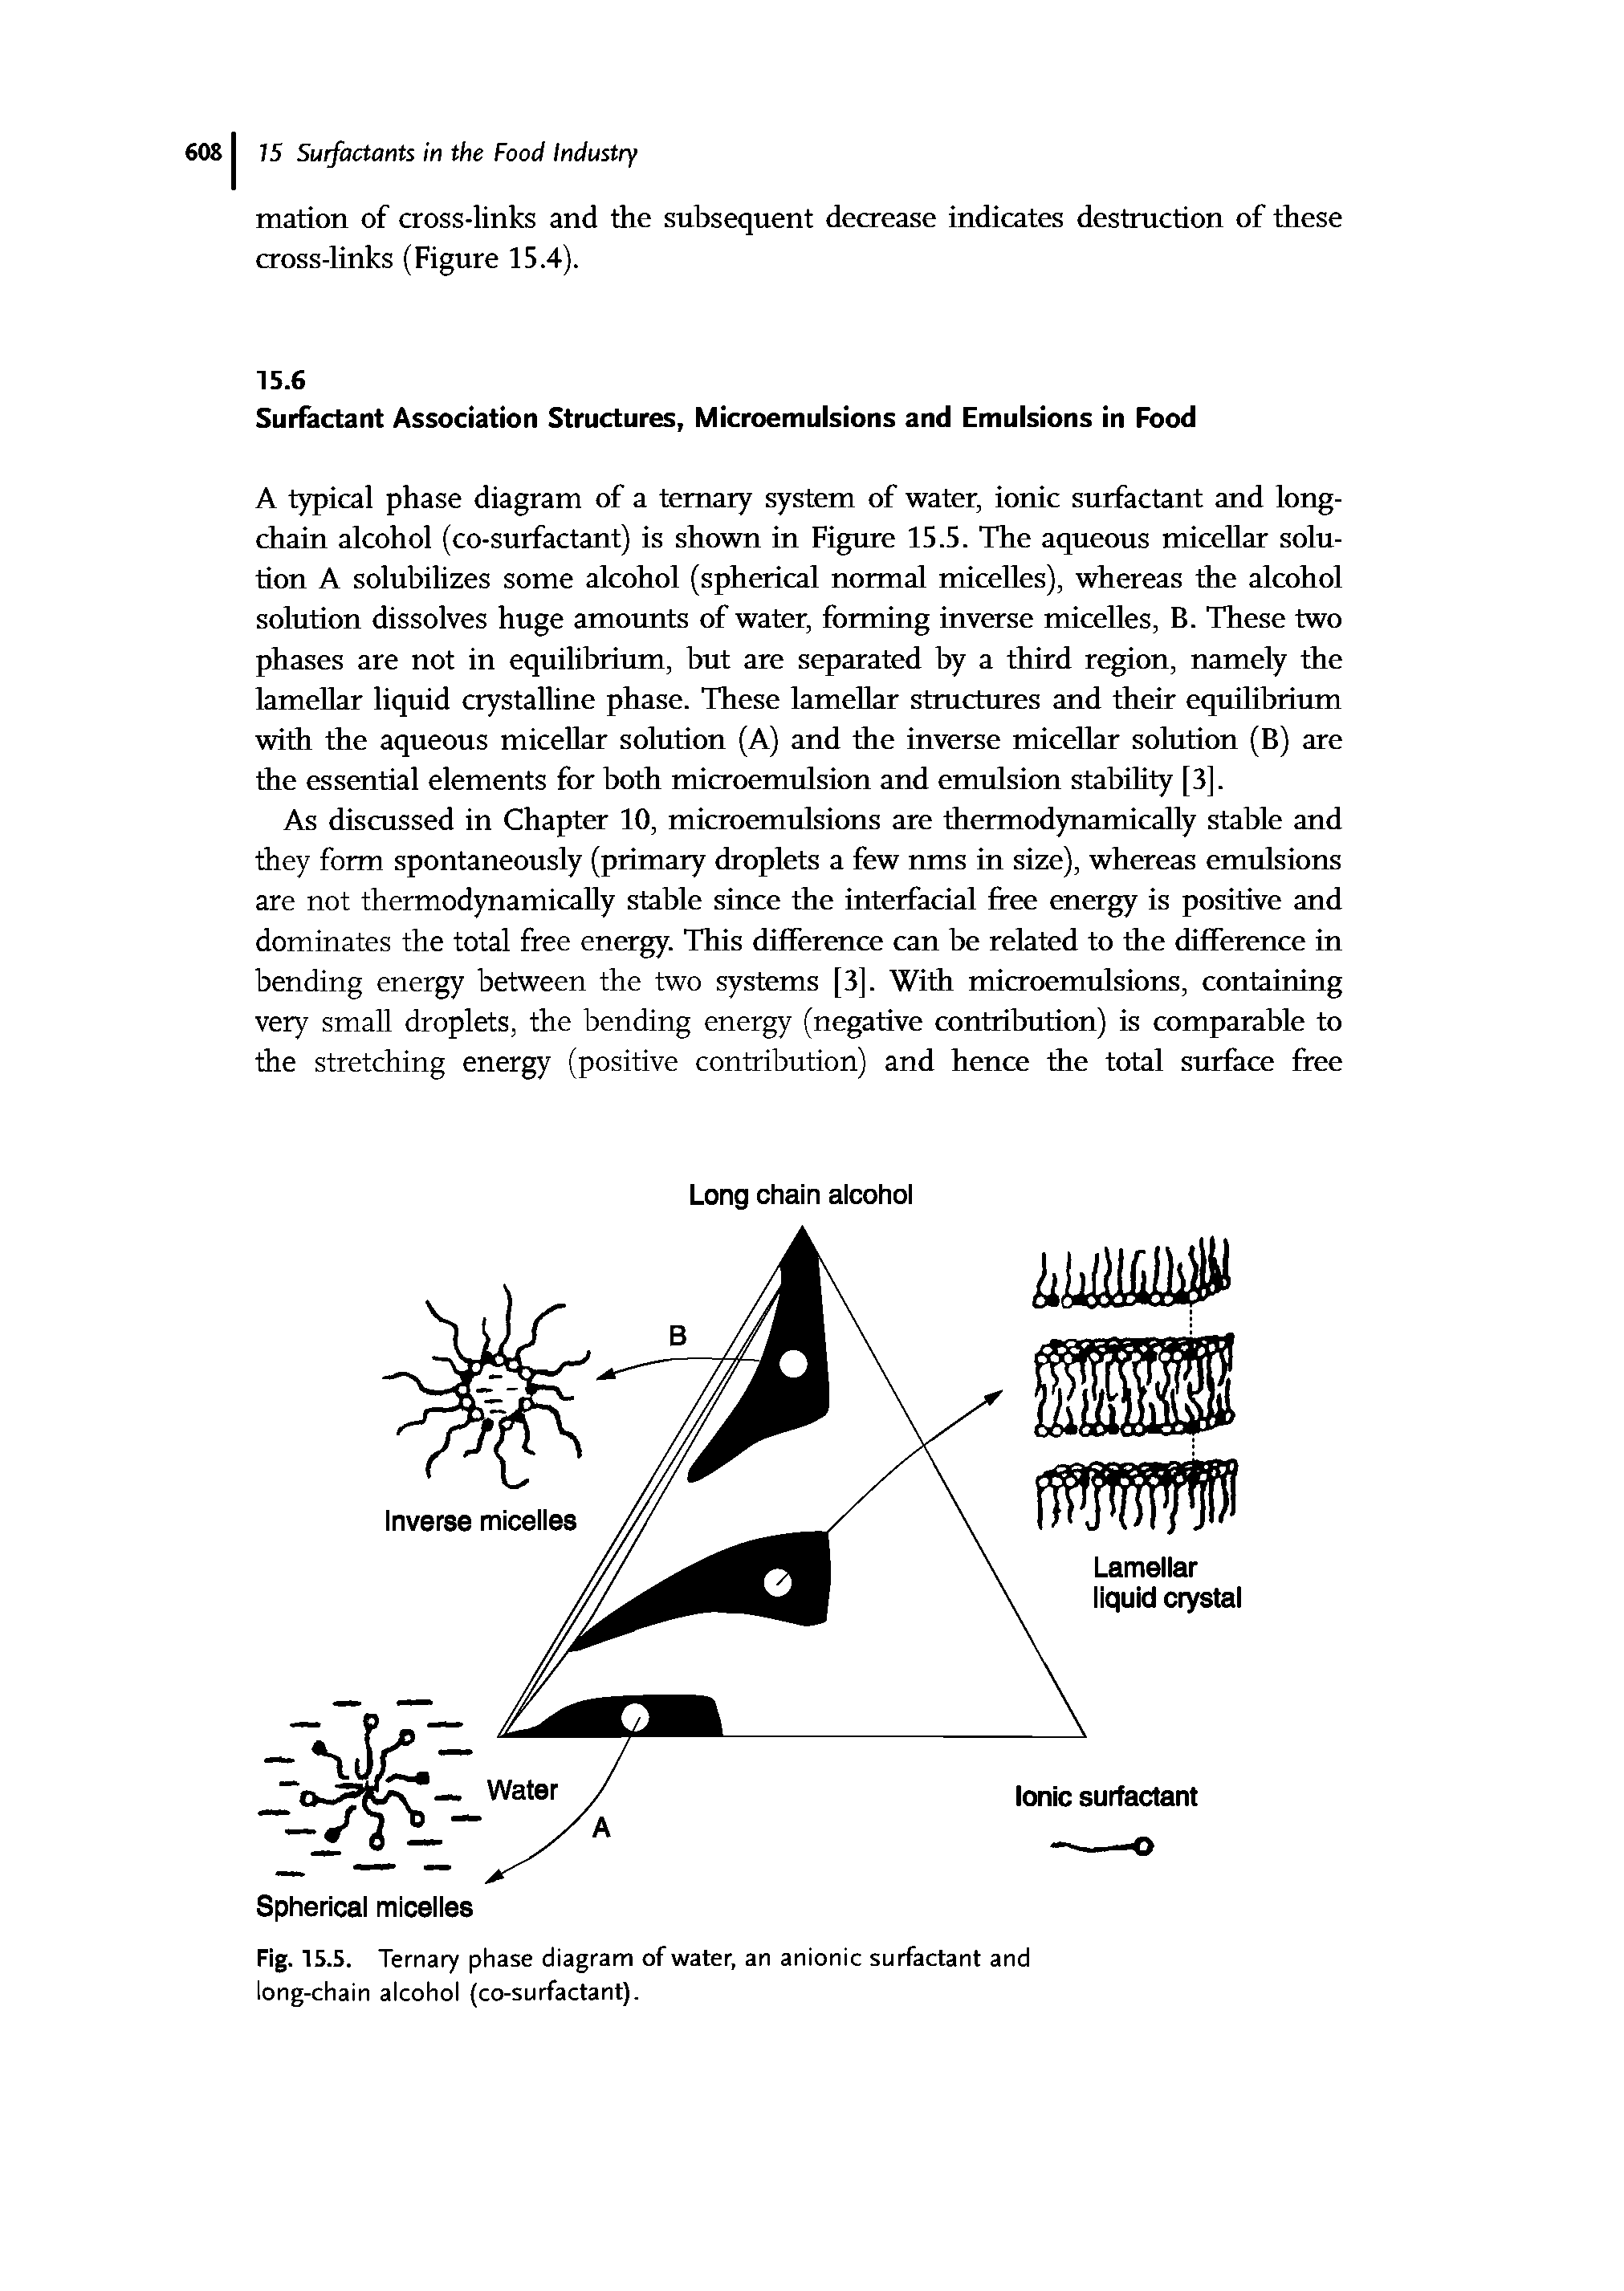 Fig. 15.5. Ternary phase diagram of water, an anionic surfactant and iong-chain aicohoi (co-surfactant).